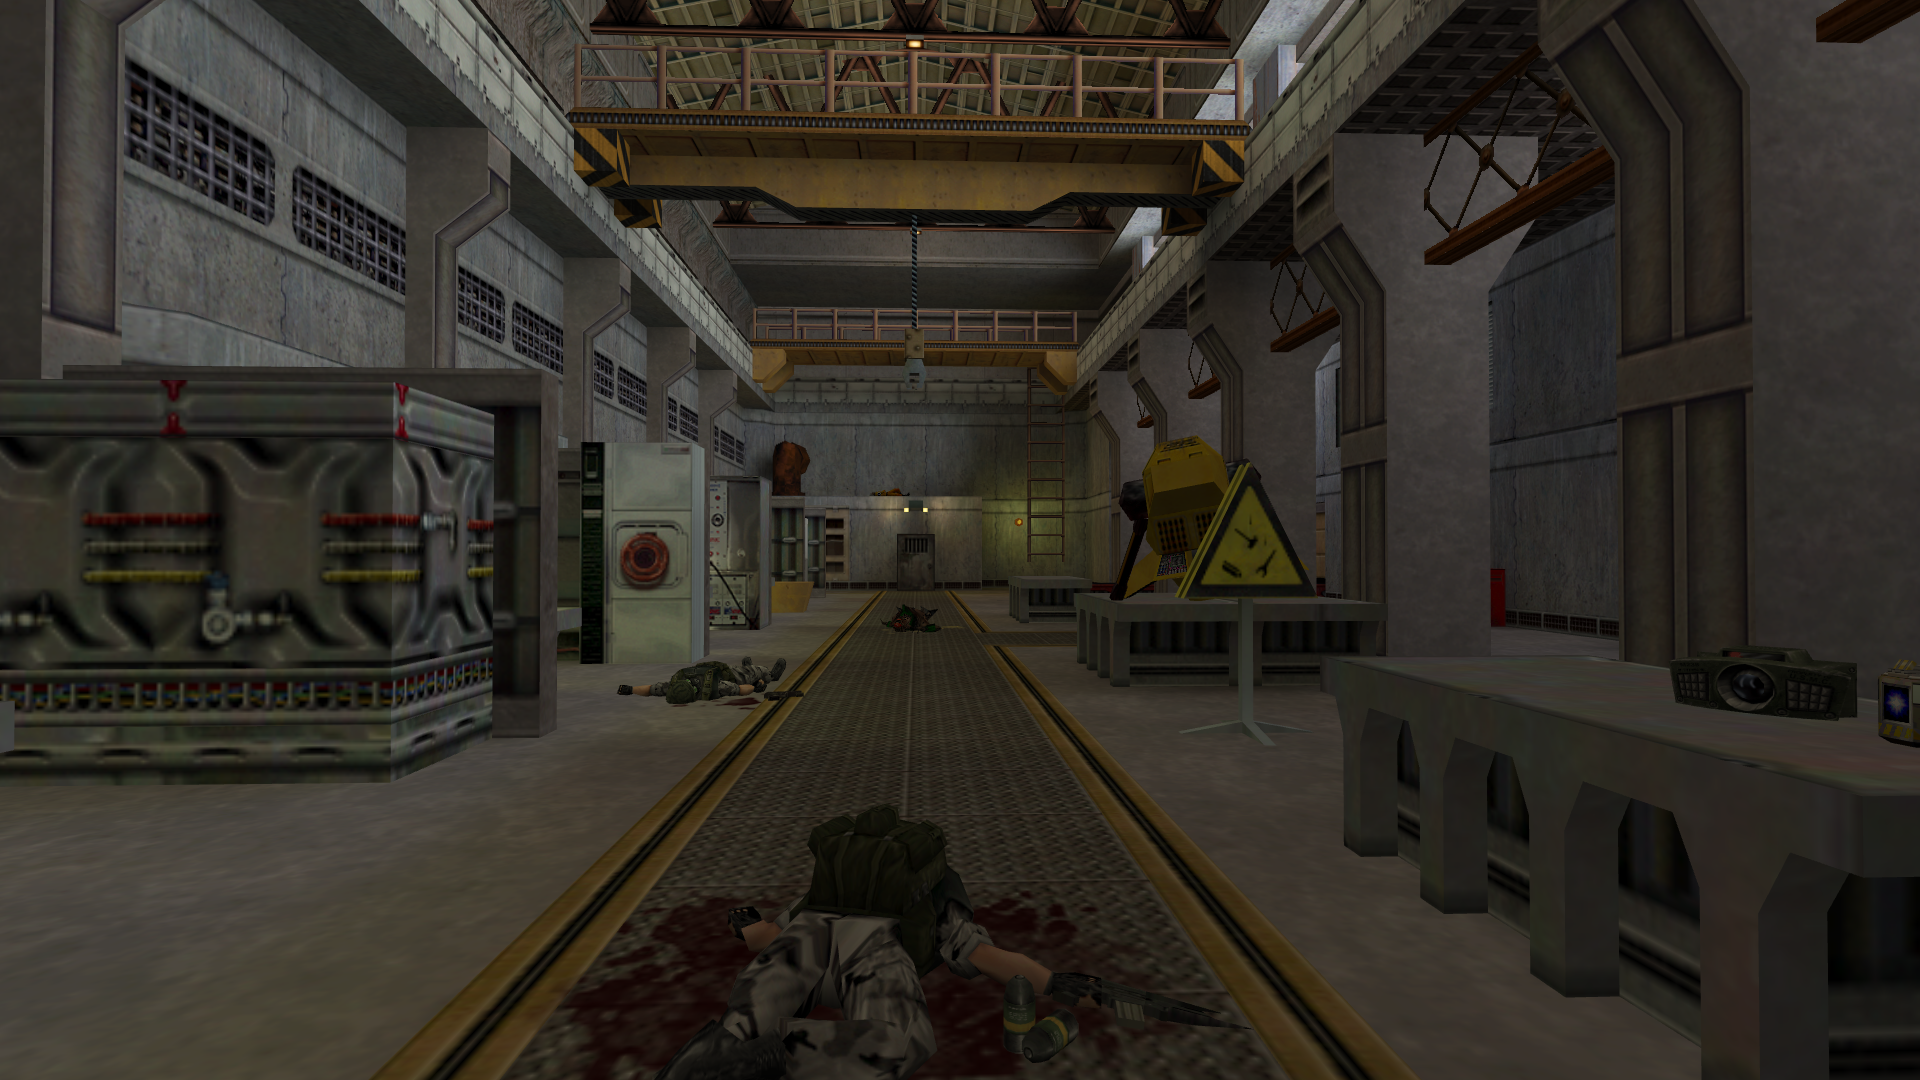 Four Half-Life single-player mods to play while you wait for Half-Life 3